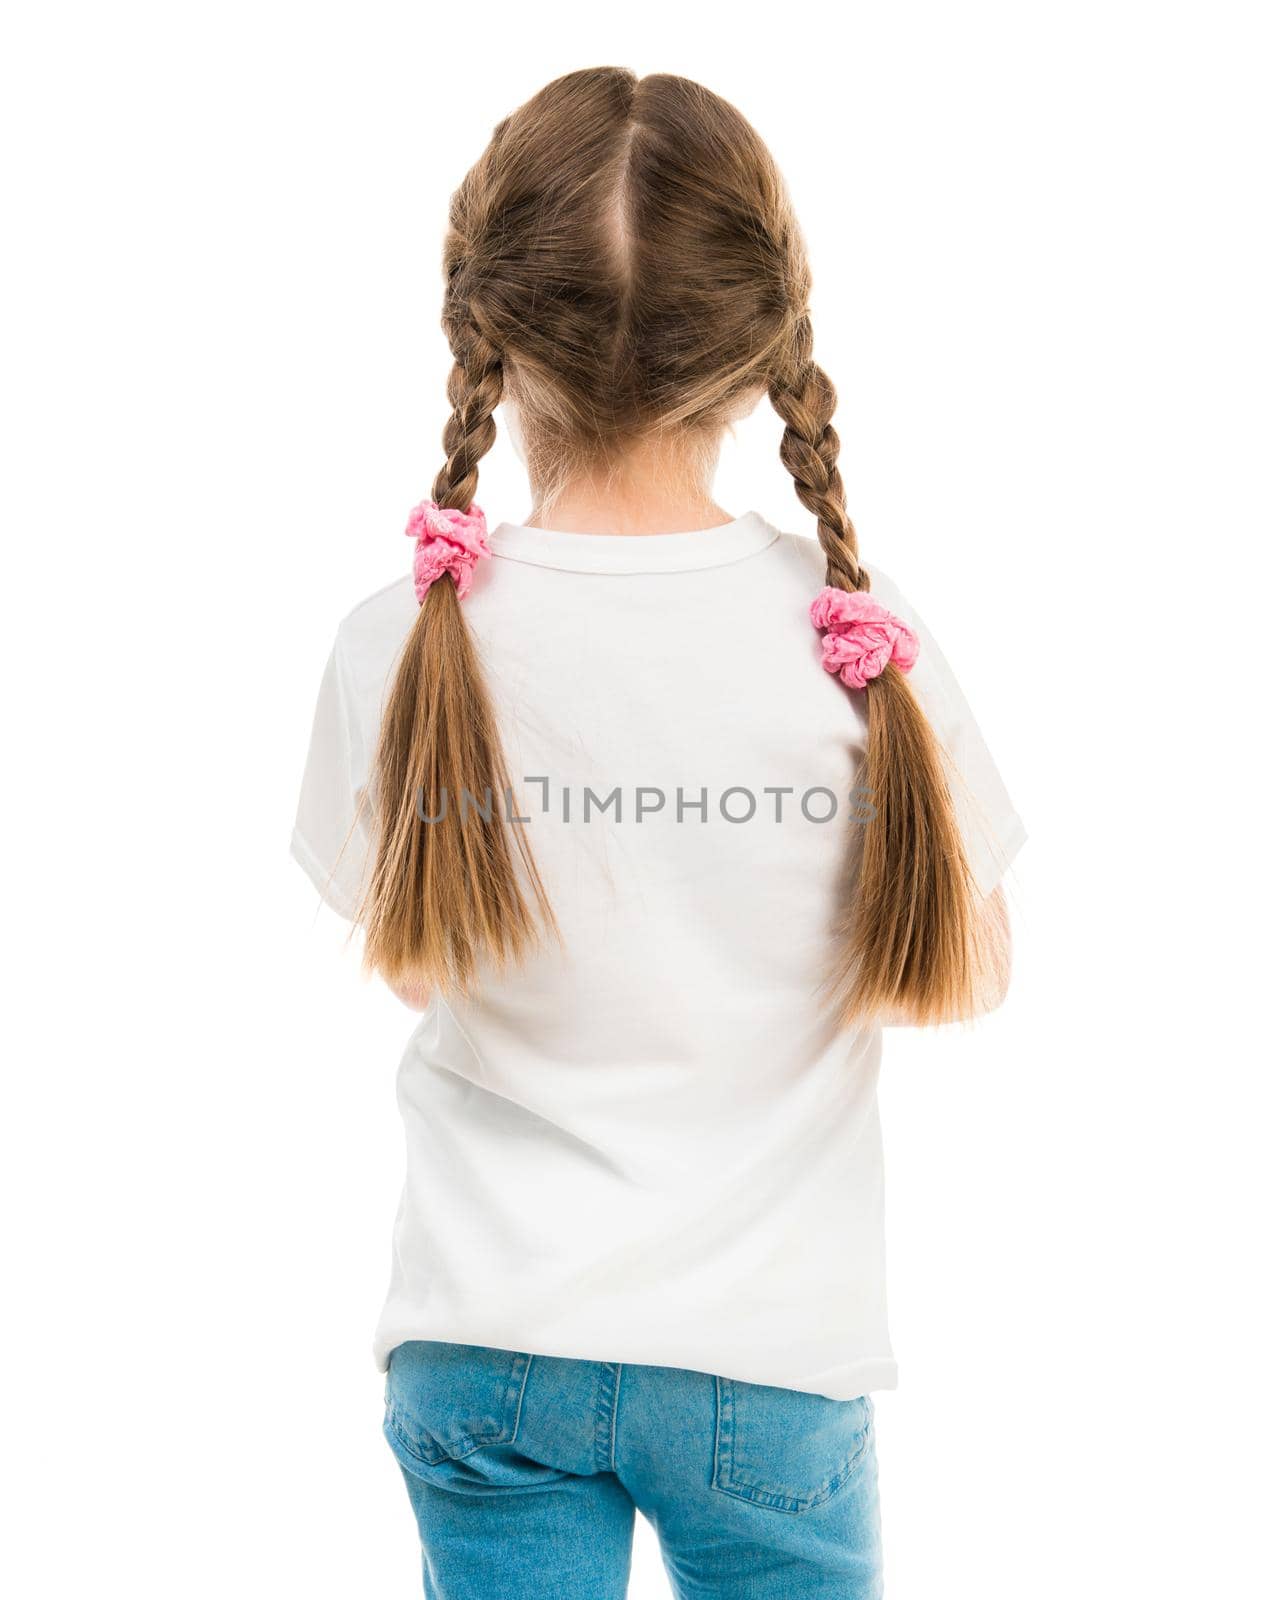 cute girl in white t-shirt, back against a white background